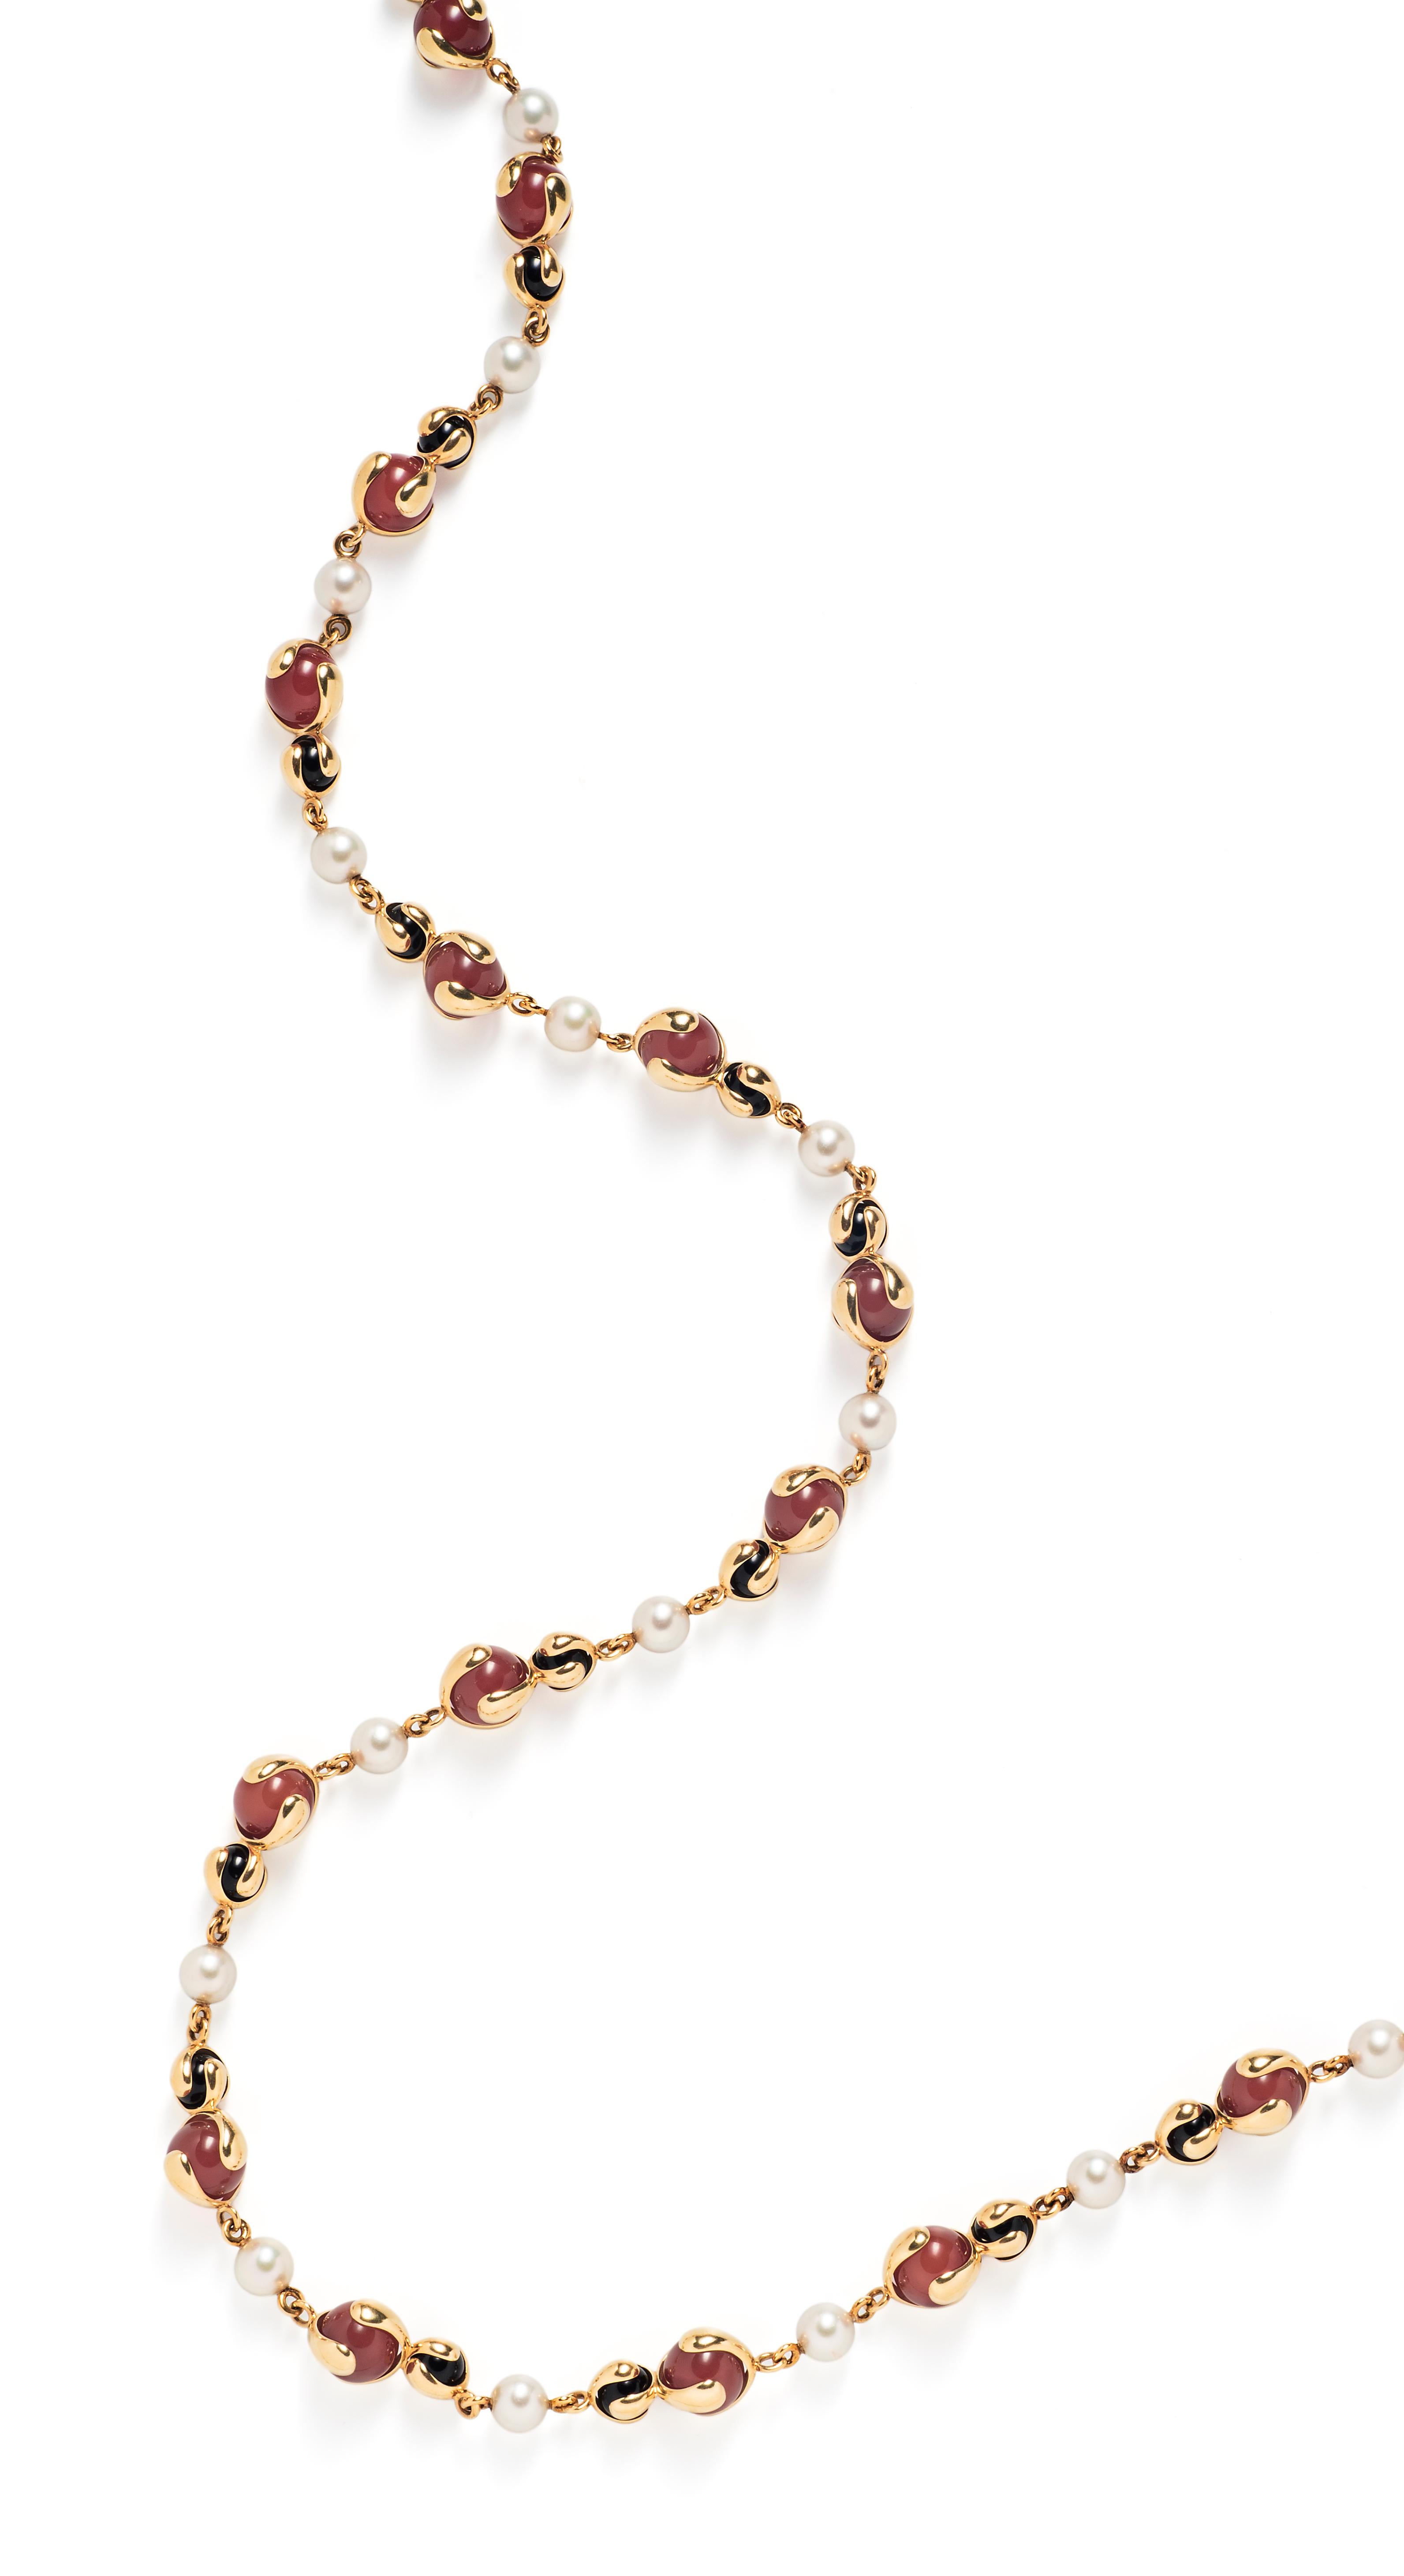 Considered one of the most important women jewelers of the 20th century, Marina B. was a forward-thinking designer whose work transcended the style of her times. This elegant long station necklace from her late 80s Cardan Collection consists of a